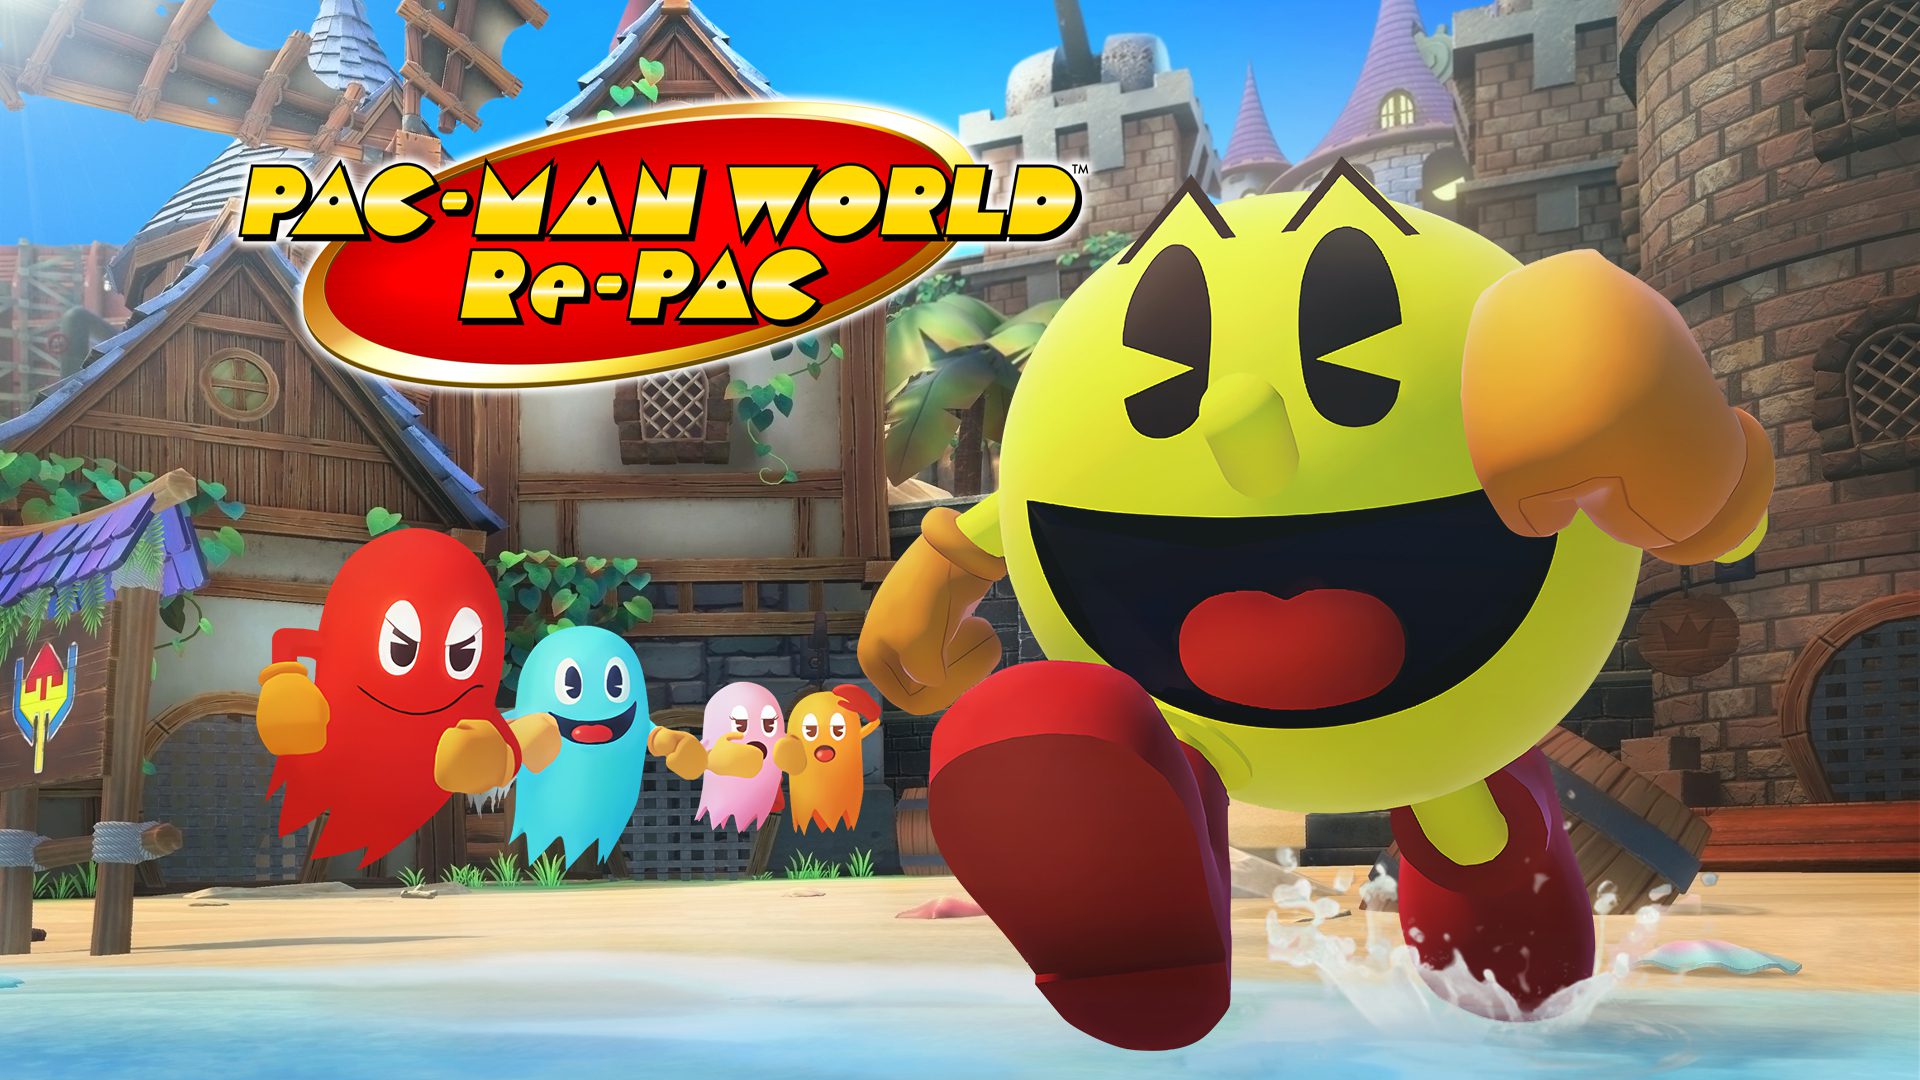 Pac-Man World Re-Pac game poster